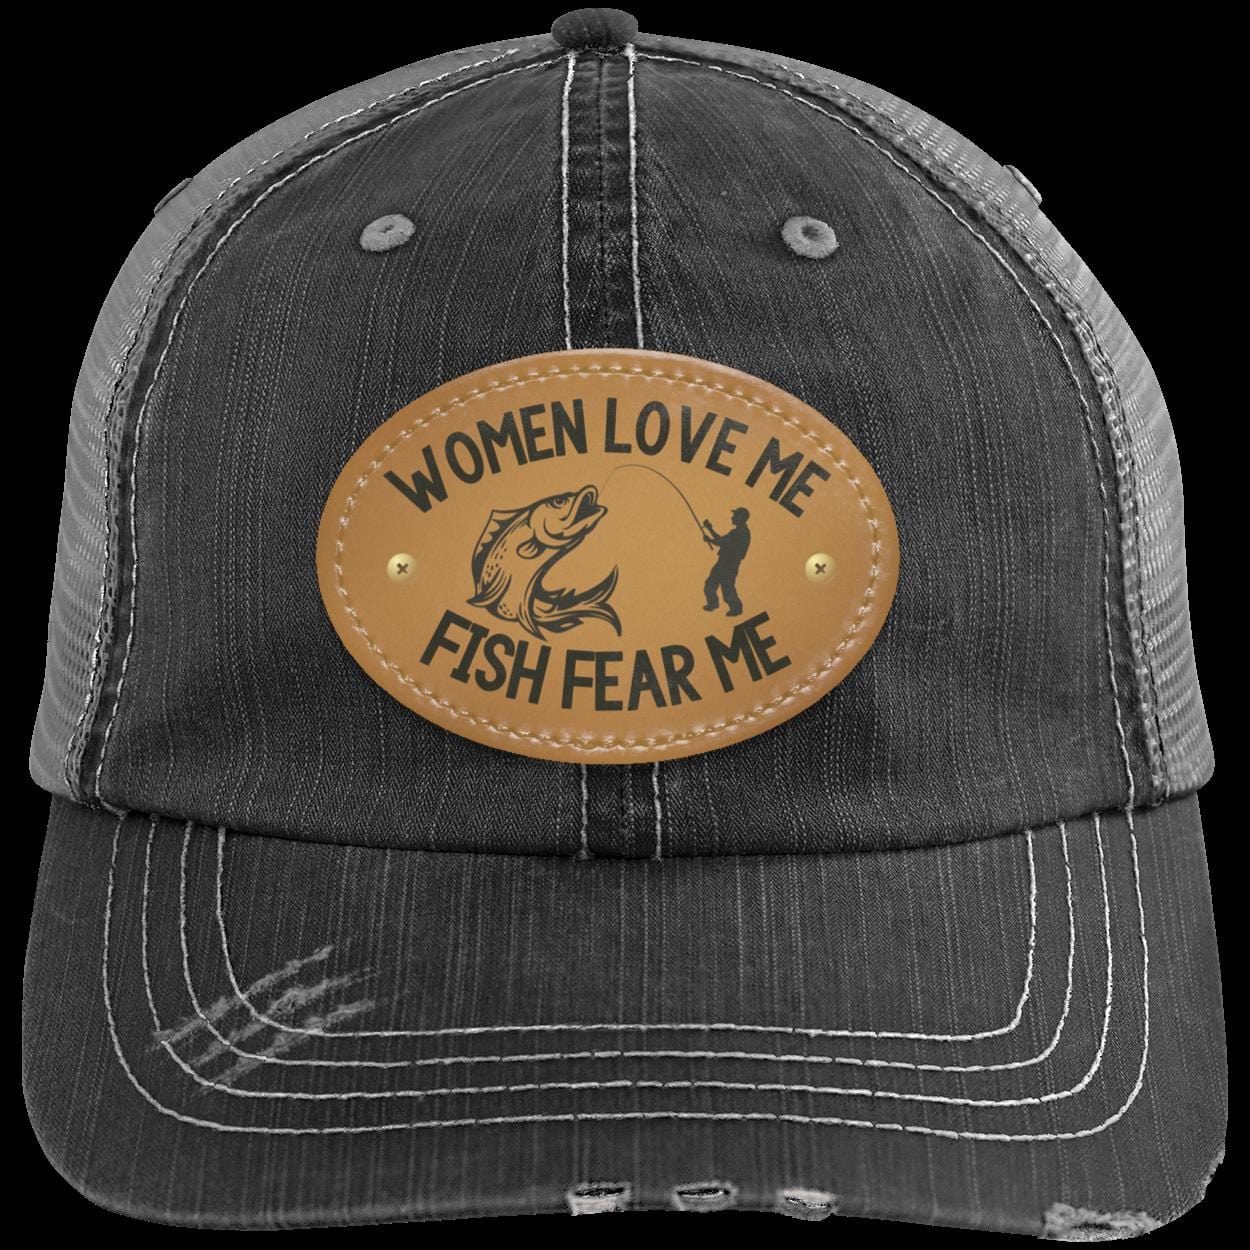 Women Want Me Fish Fear Me Embroidered Baseball Cap Hat in 15